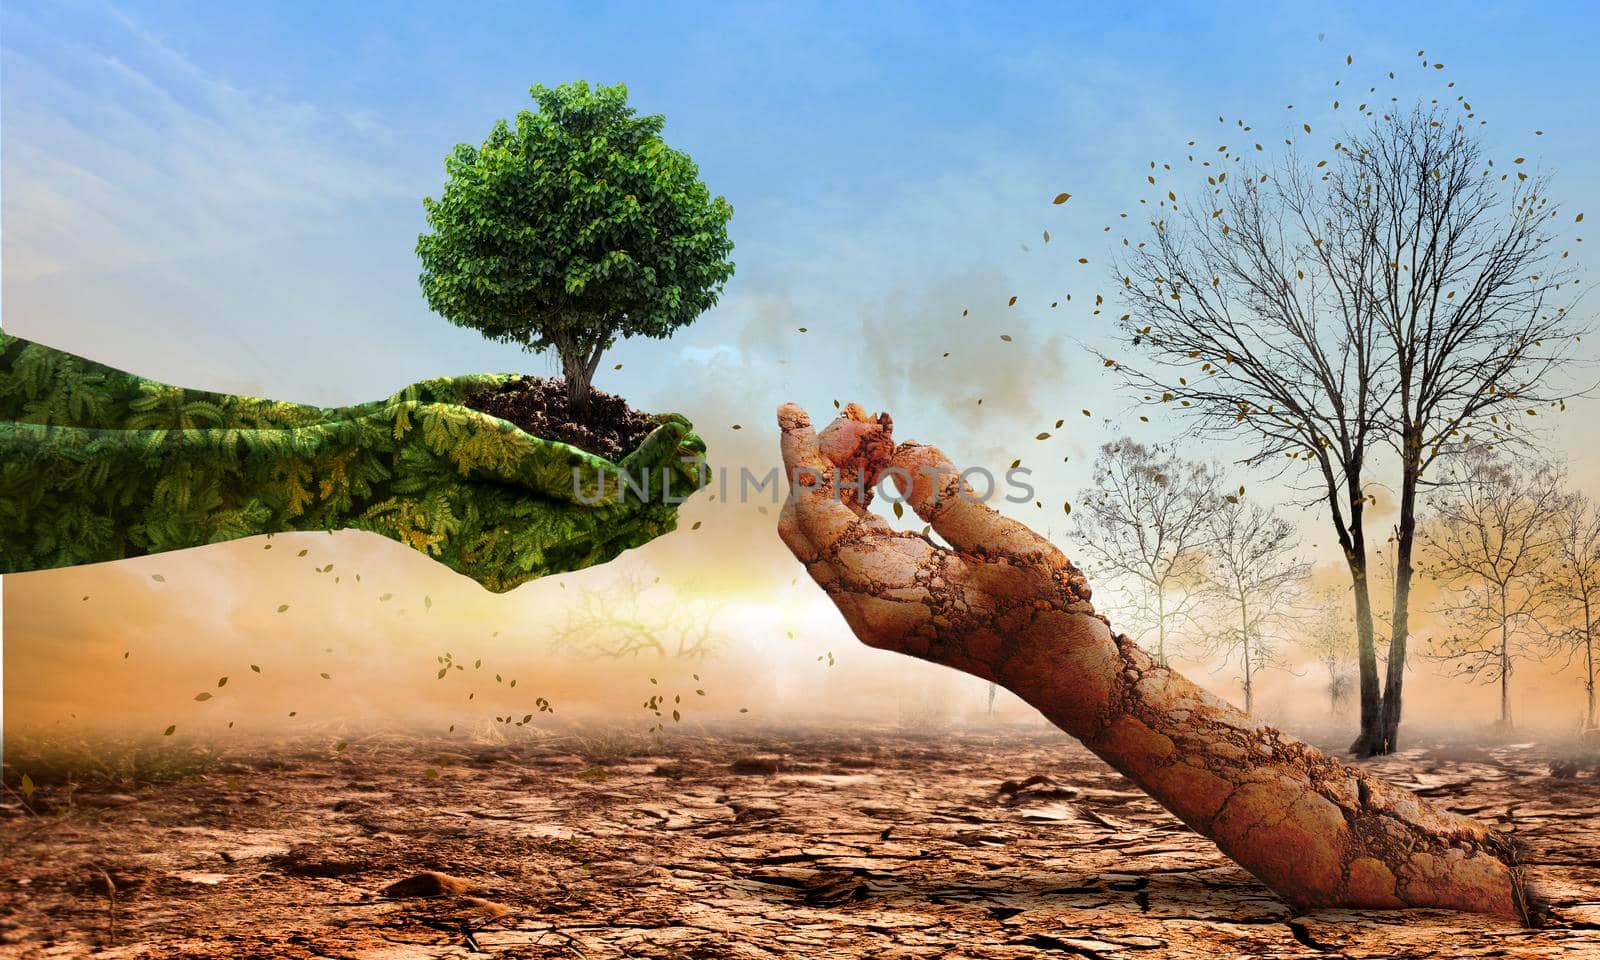 Green hands holding tree growing and dry soil hand on crack earth. Saving environment and natural conservation concept.